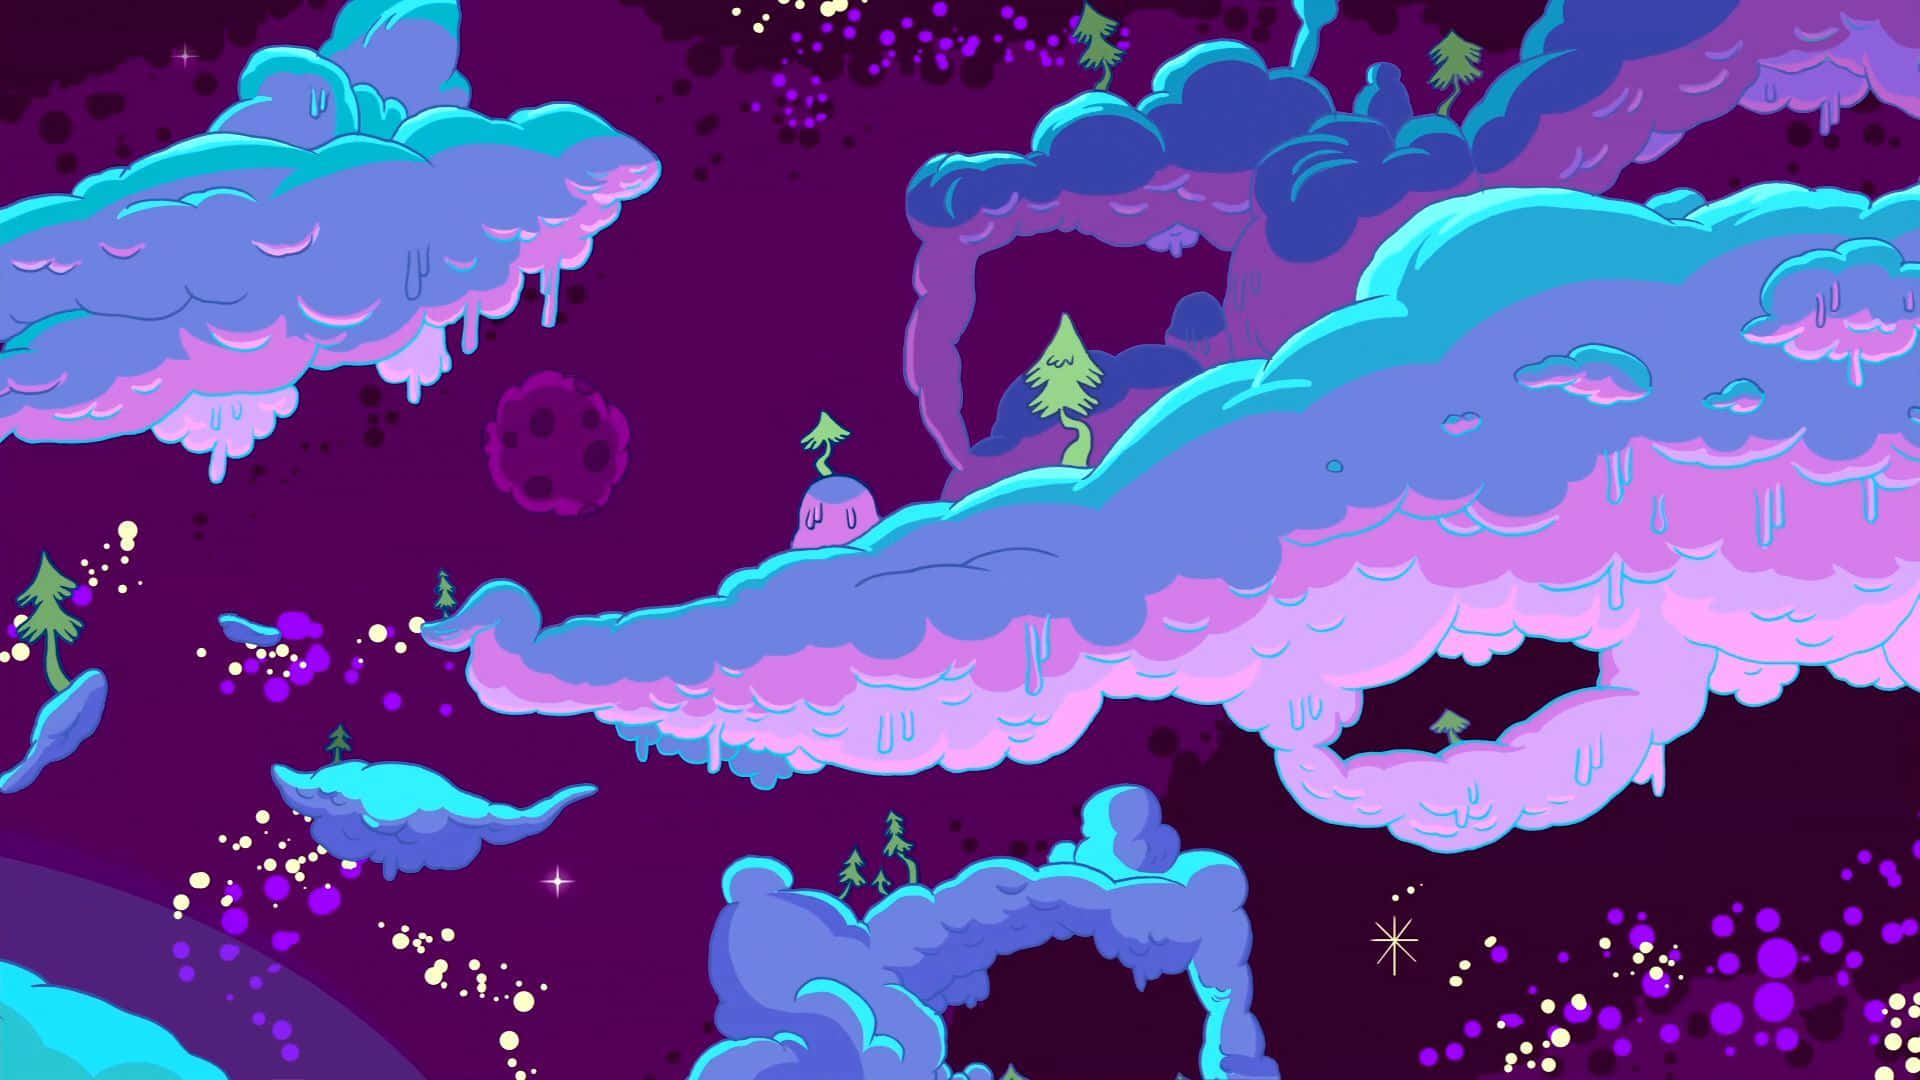 A Purple And Blue Space With Clouds And Stars Wallpaper